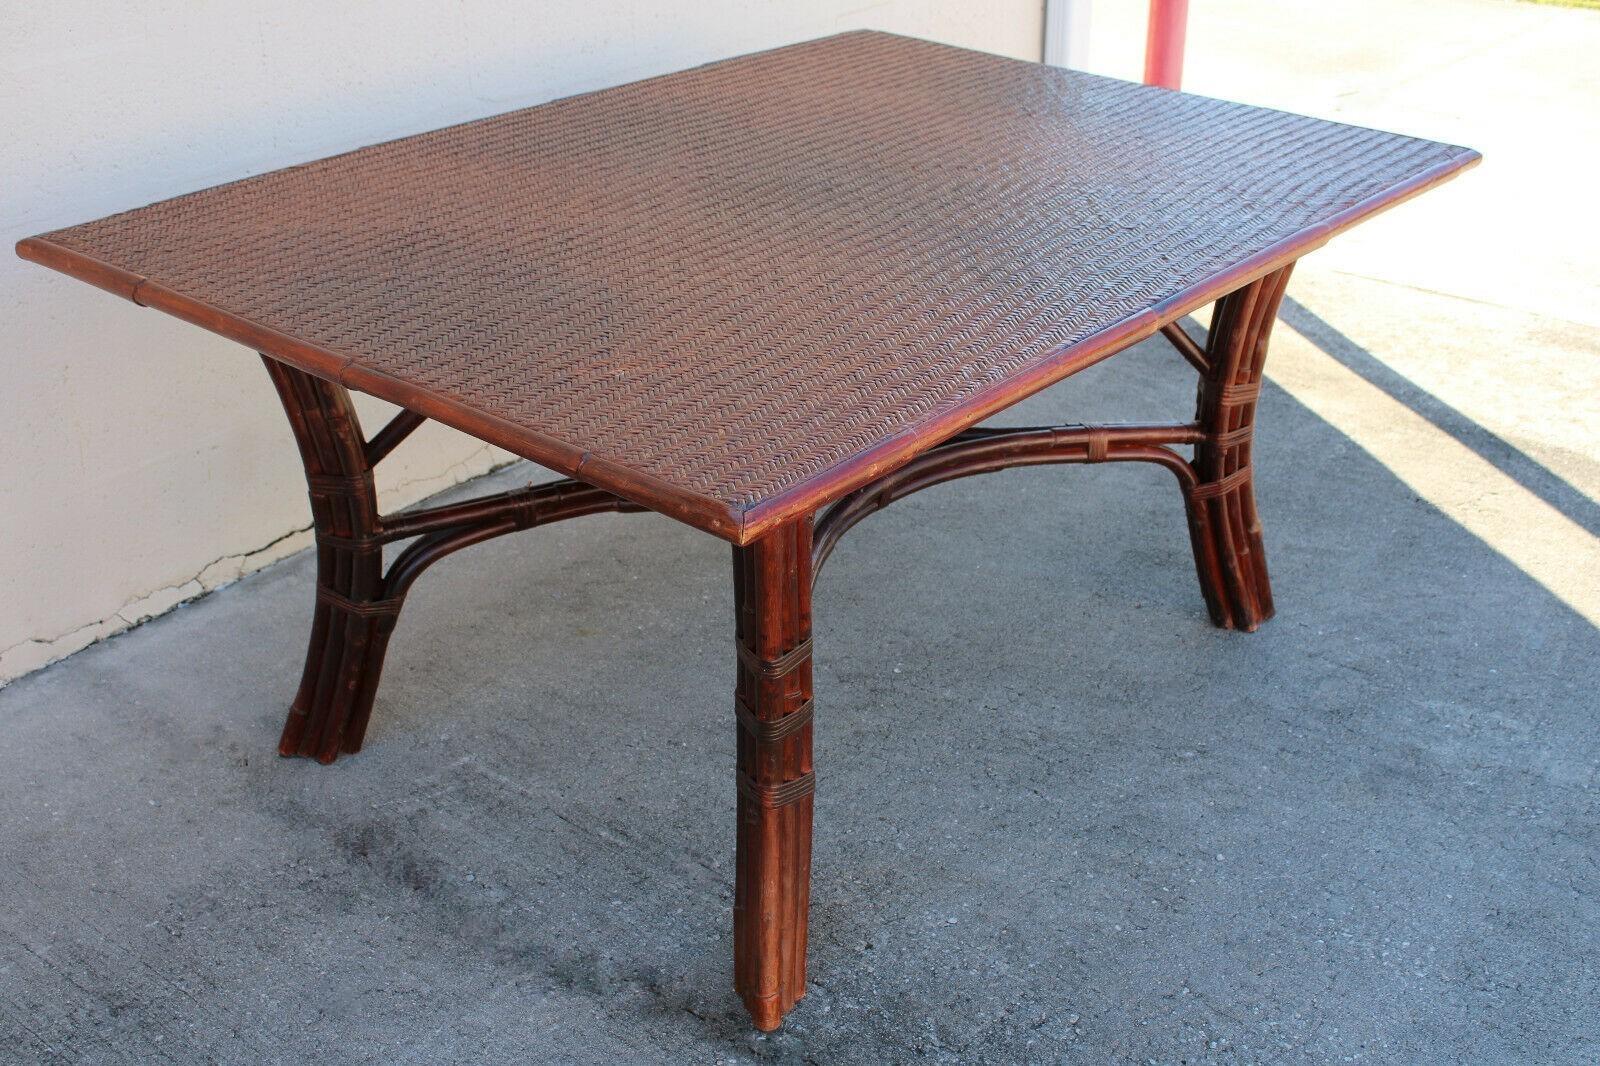 Hand-Woven Vintage Ralph Lauren Collection Rattan Dining Table For Sale